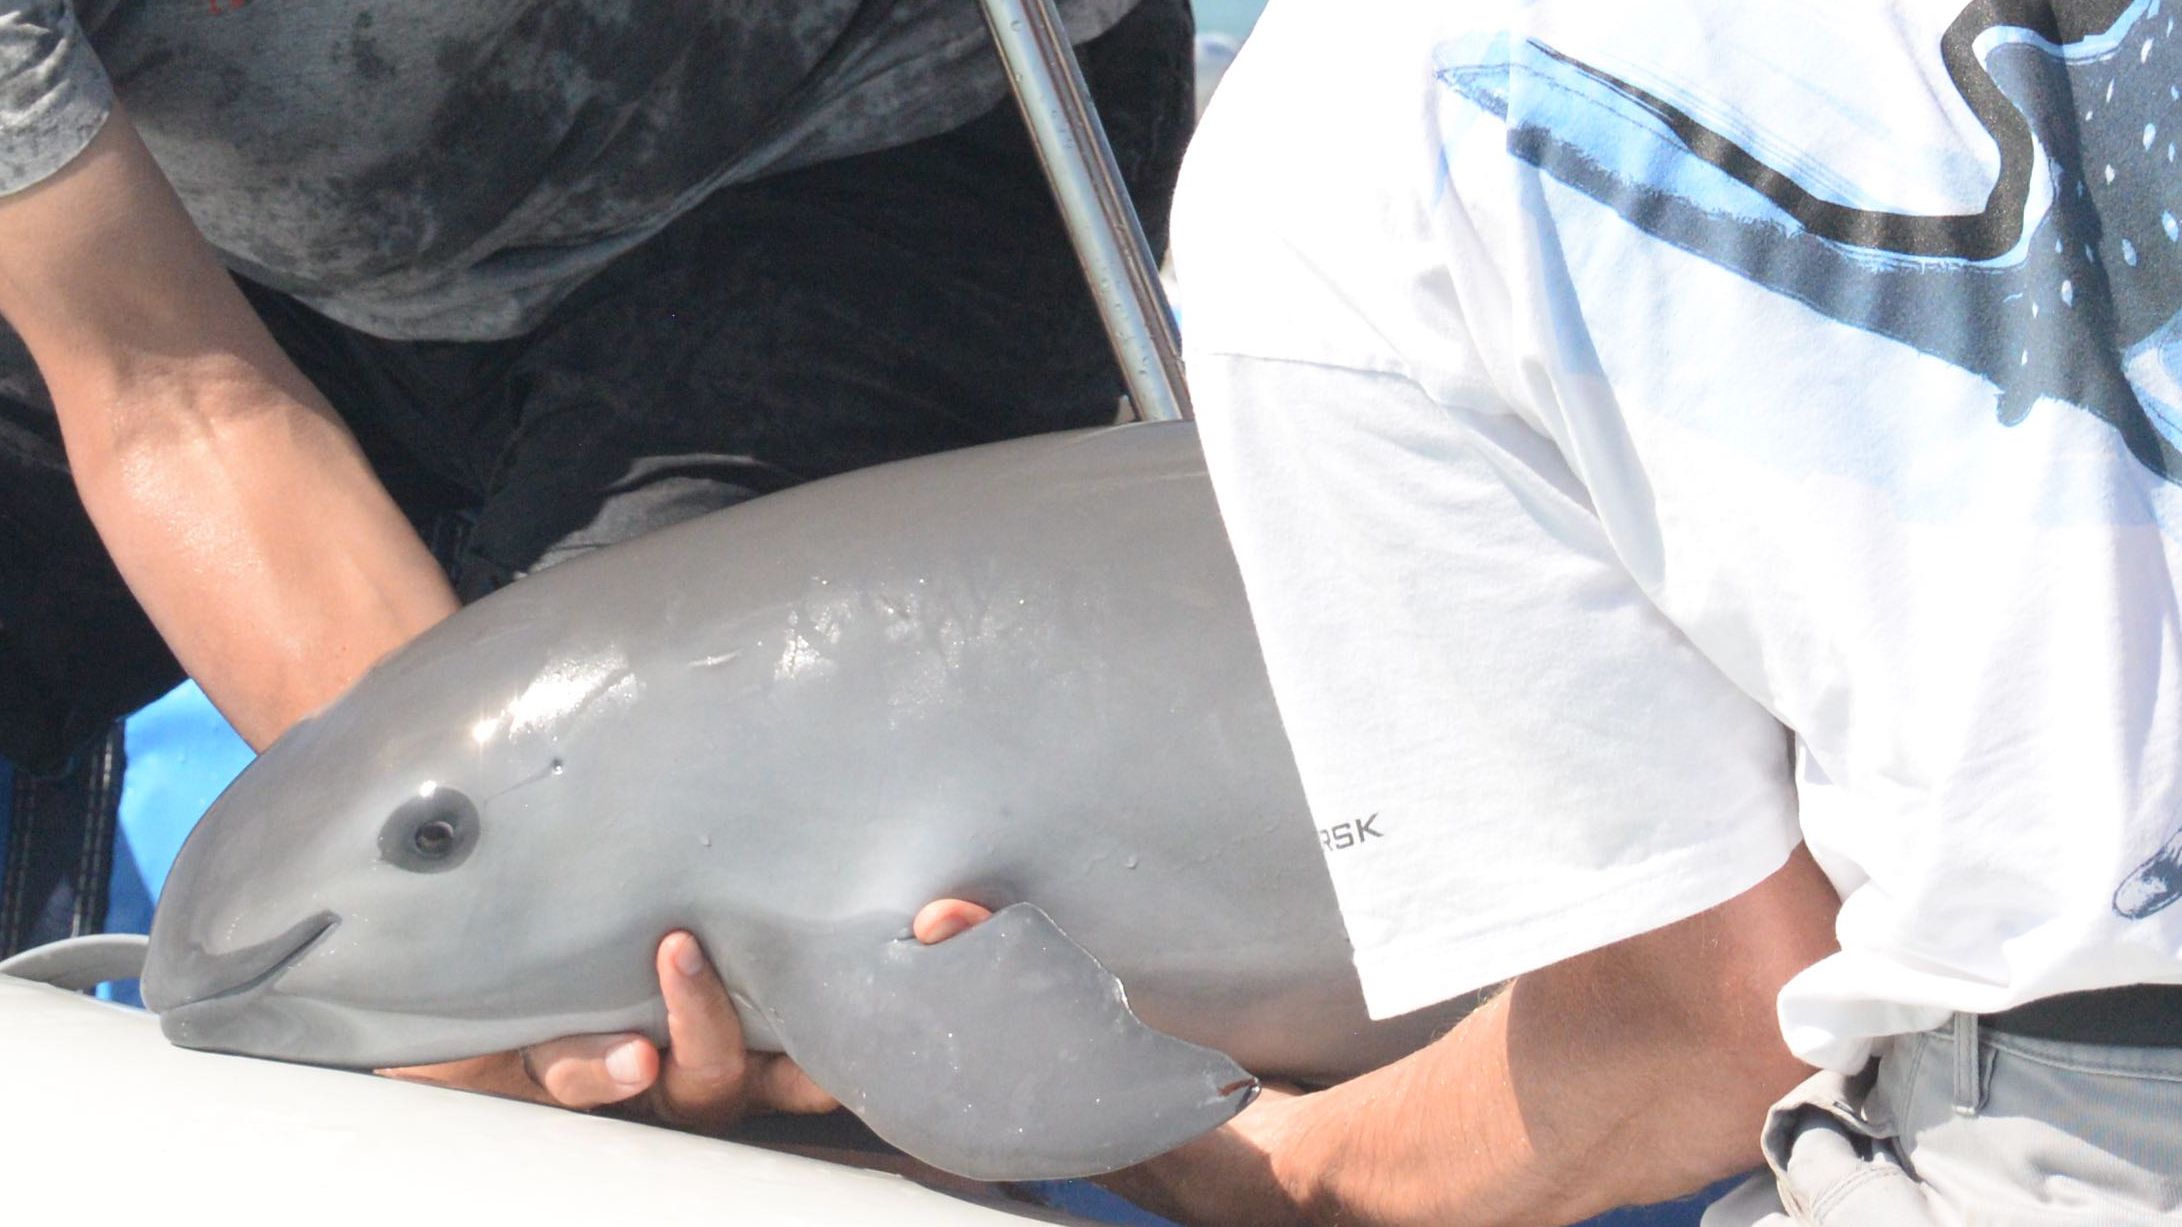 11 Facts About the Vaquita, The World's Most Endangered Porpoise